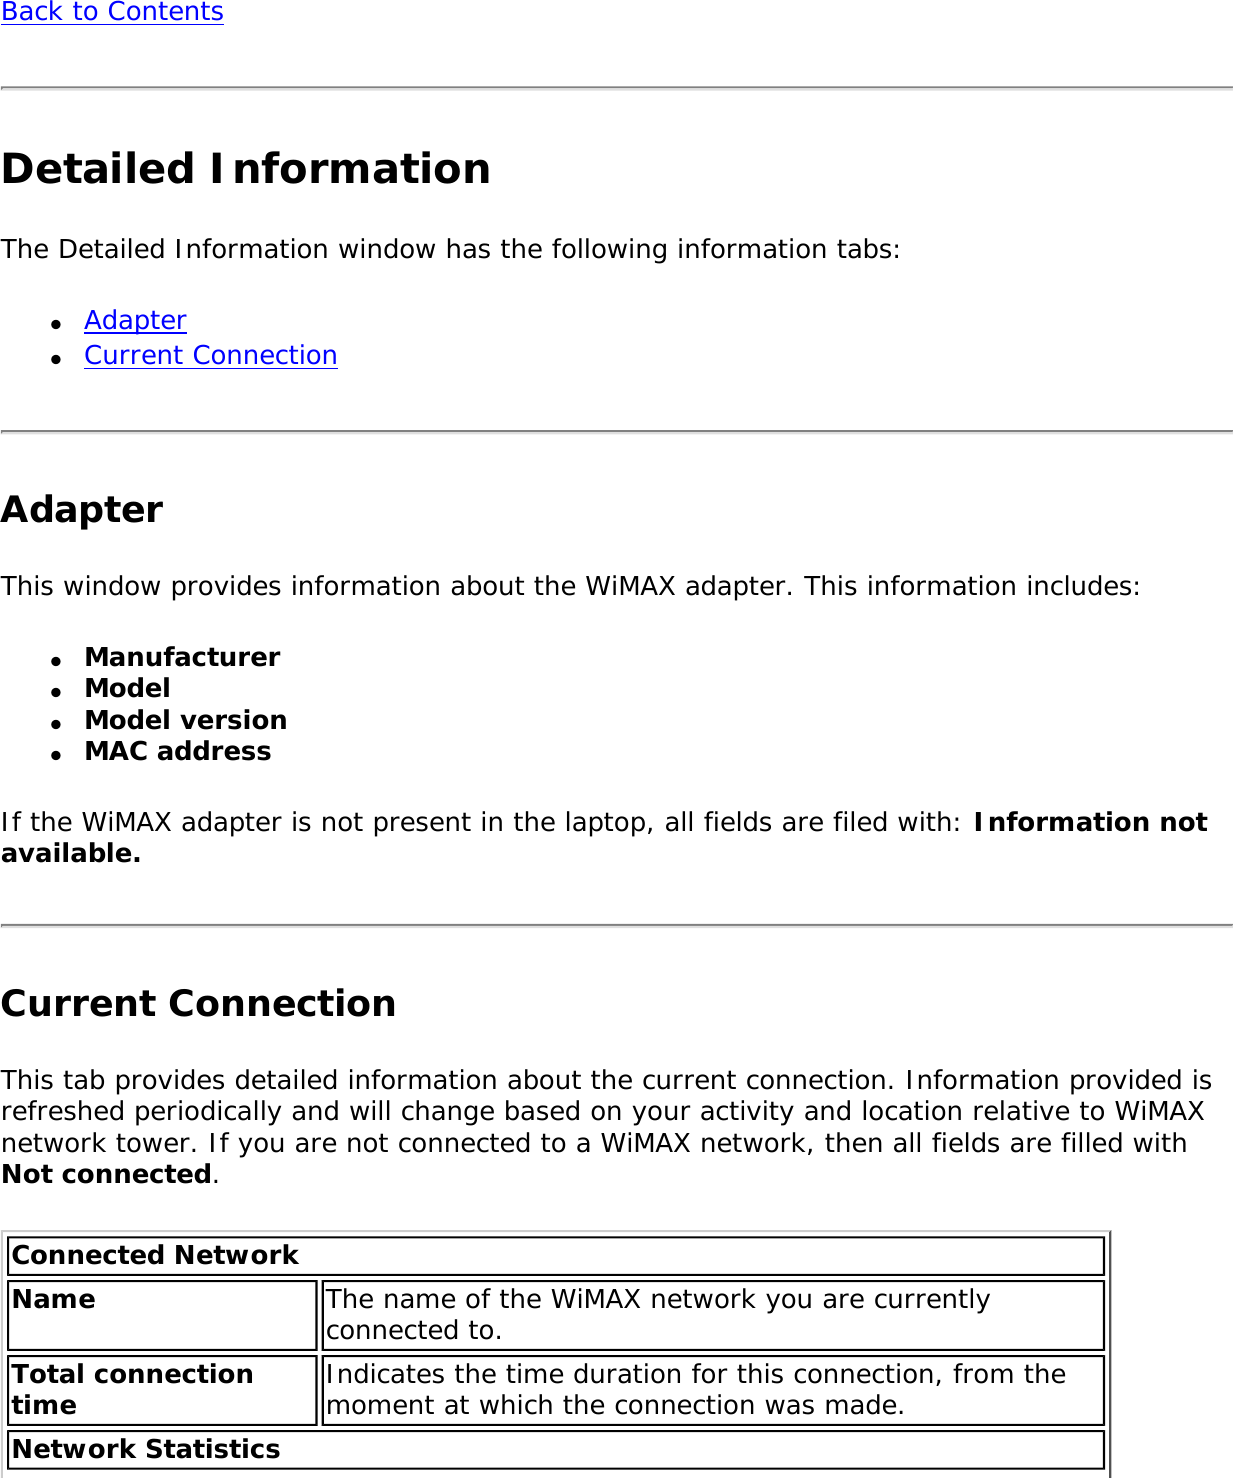 Back to ContentsDetailed InformationThe Detailed Information window has the following information tabs:●     Adapter●     Current ConnectionAdapter This window provides information about the WiMAX adapter. This information includes:●     Manufacturer●     Model●     Model version ●     MAC addressIf the WiMAX adapter is not present in the laptop, all fields are filed with: Information not available. Current ConnectionThis tab provides detailed information about the current connection. Information provided is refreshed periodically and will change based on your activity and location relative to WiMAX network tower. If you are not connected to a WiMAX network, then all fields are filled with Not connected. Connected Network Name The name of the WiMAX network you are currently connected to.Total connection time  Indicates the time duration for this connection, from the moment at which the connection was made.Network Statistics 